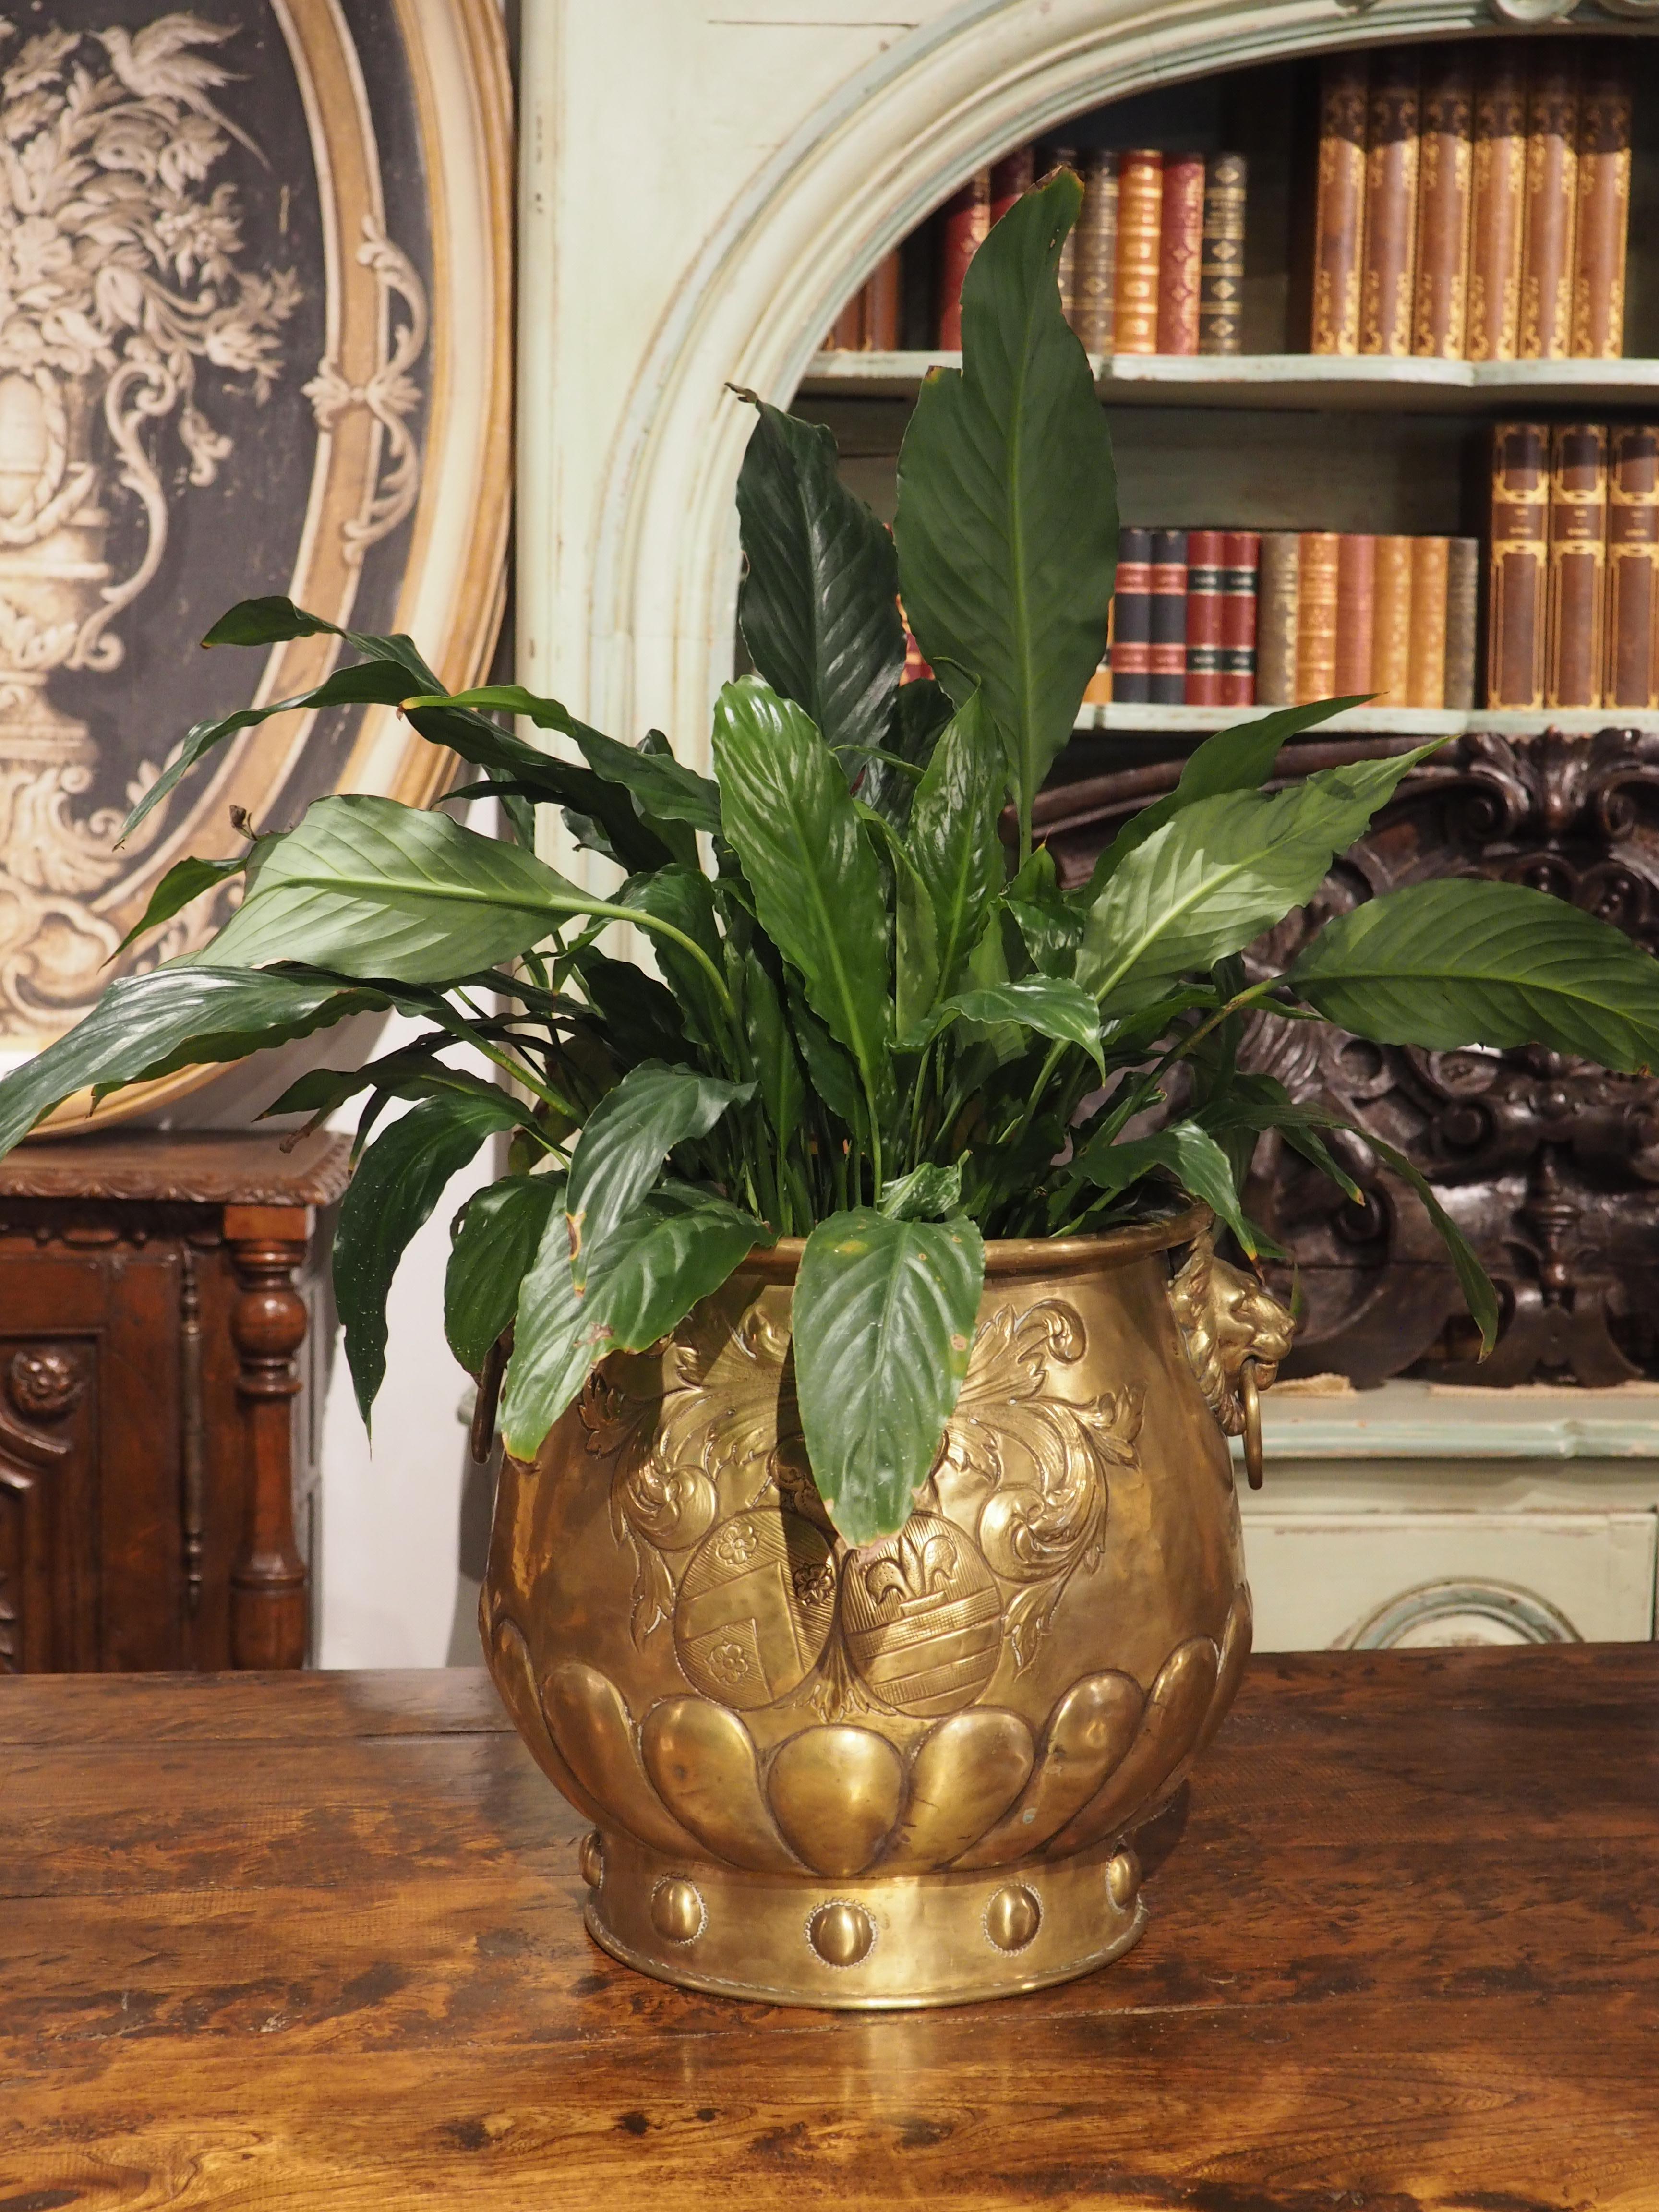 Designed to be displayed on a table or mantel, this brass cachepot with coat of arms and lions is from France. Hand-hammered in the 1800s, the cachepot was worked from the reverse side in a process known as repousse that results in low relief